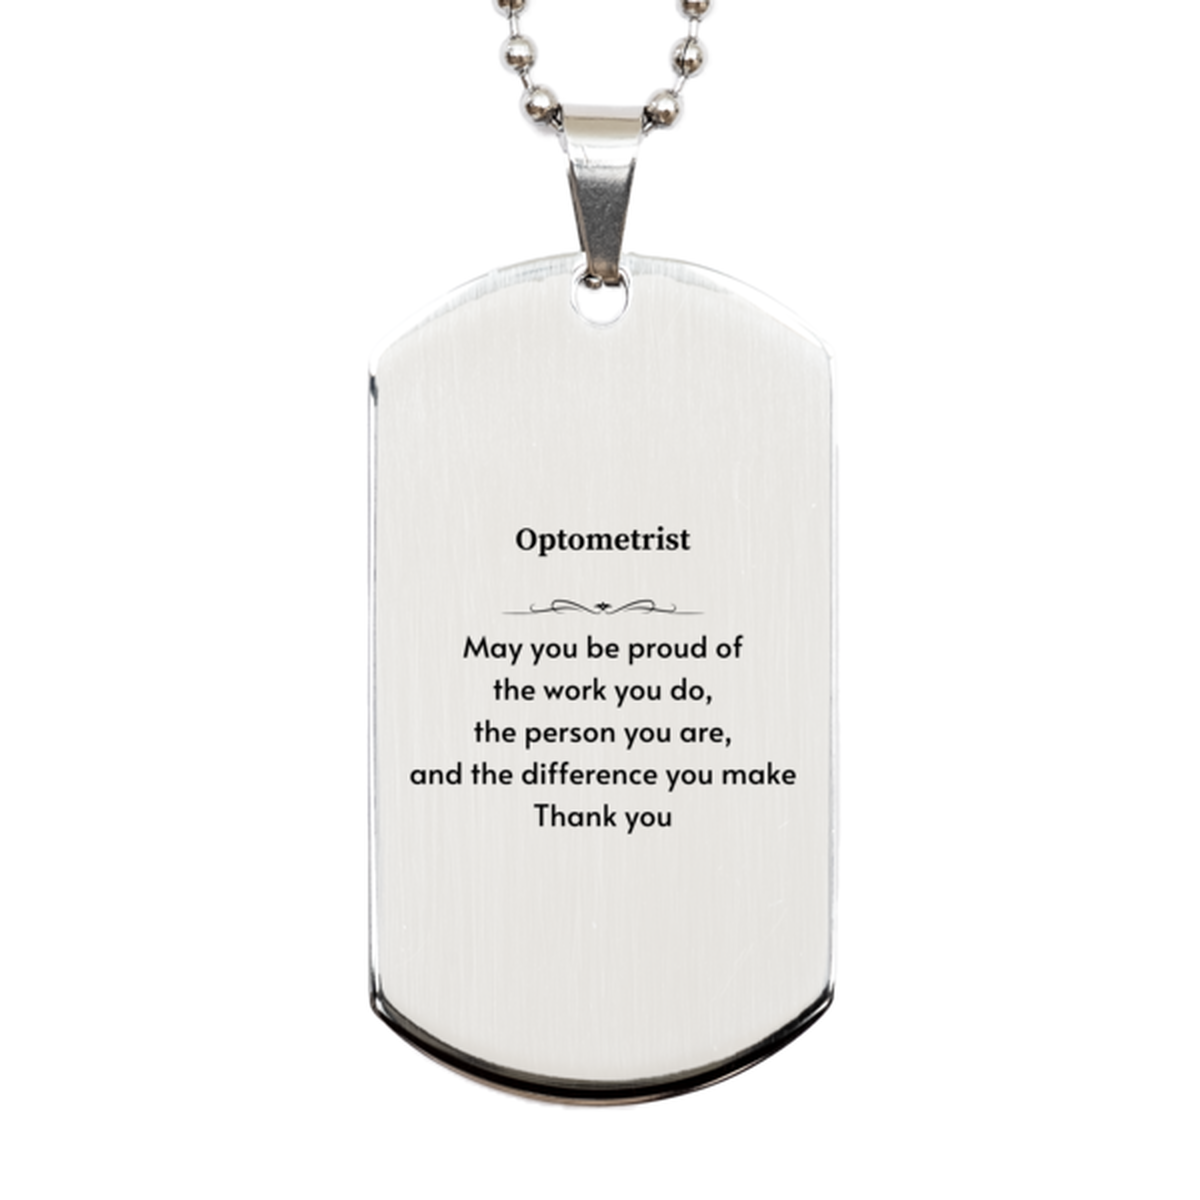 Heartwarming Silver Dog Tag Retirement Coworkers Gifts for Optometrist, Optometrist May You be proud of the work you do, the person you are Gifts for Boss Men Women Friends